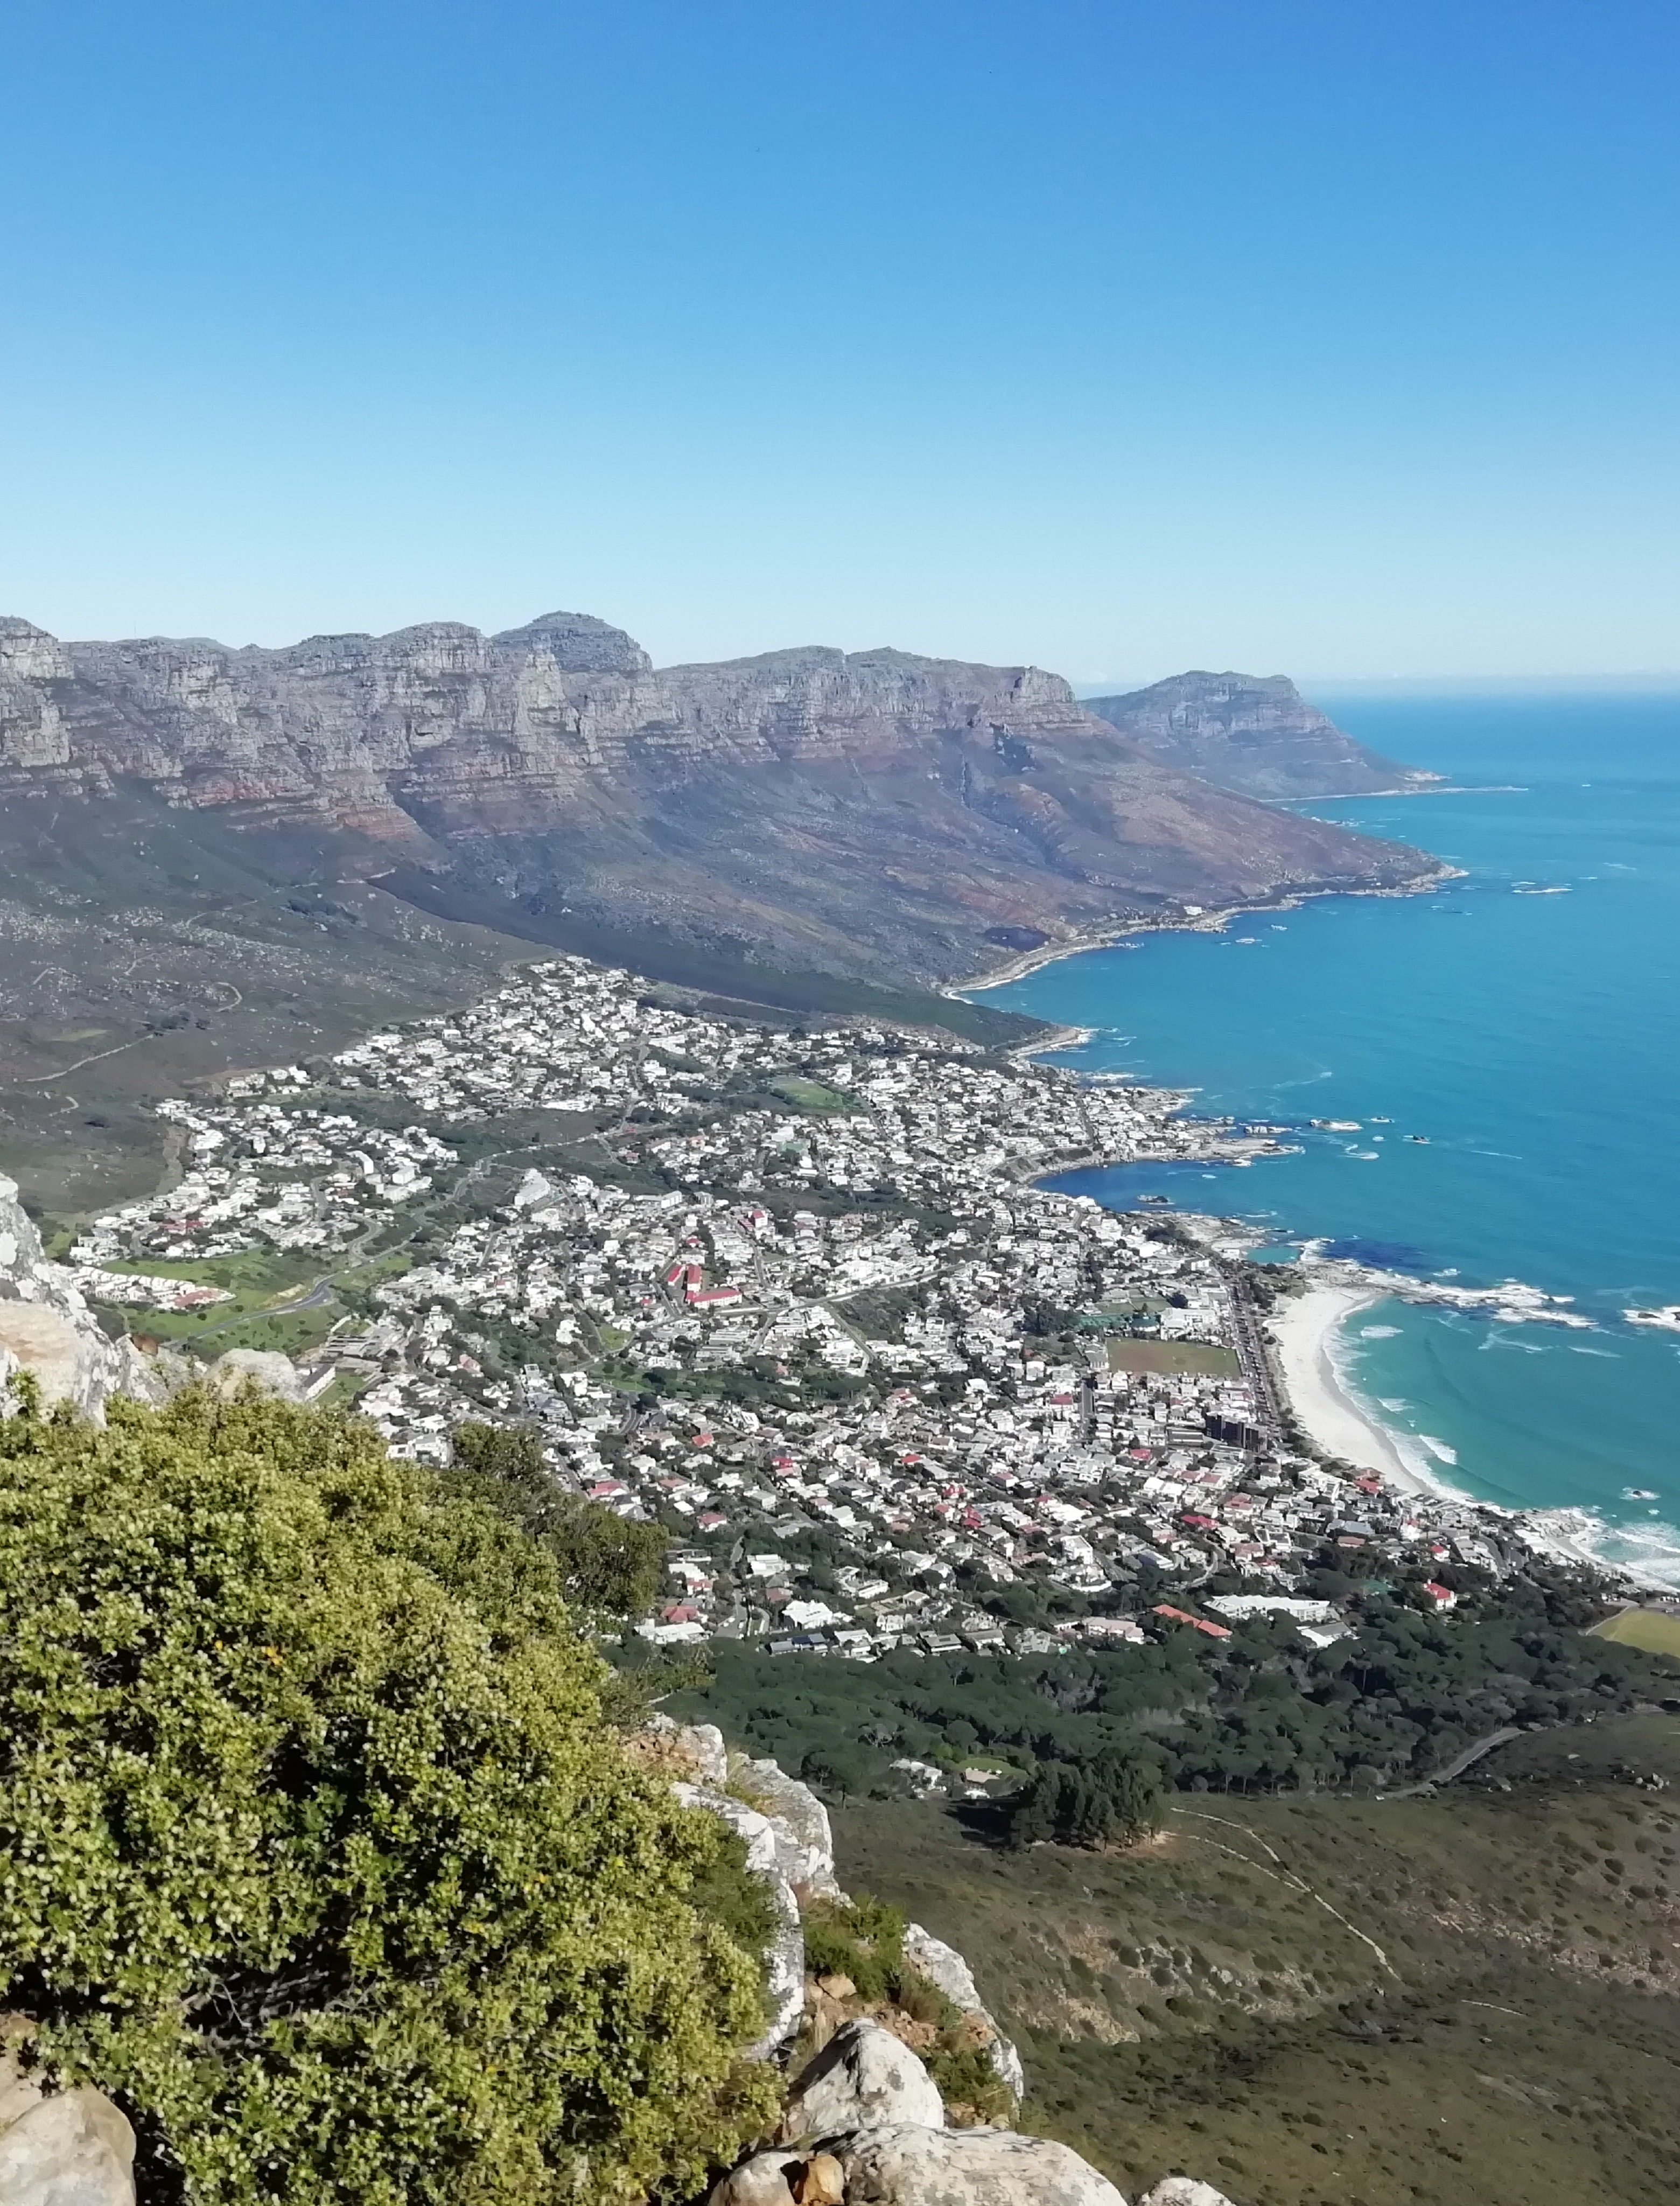 View over Camps Bay from Lion's Head, Cape Town, South Africa